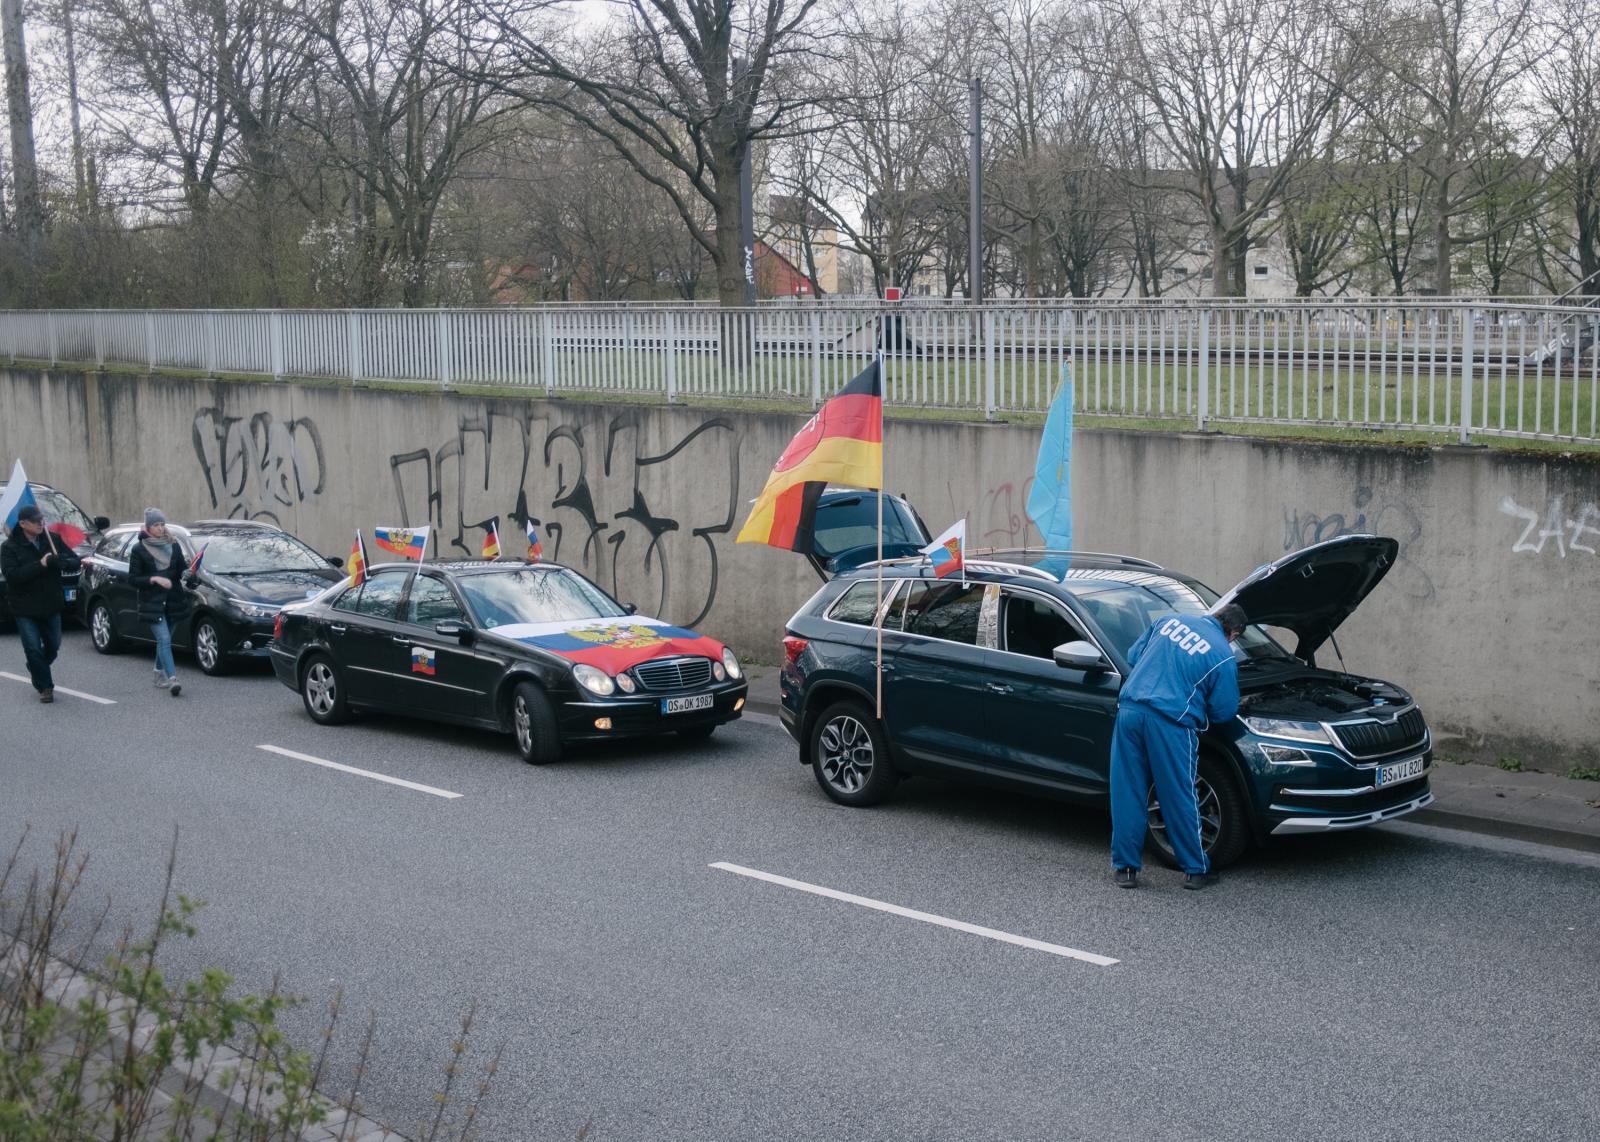 Russian Motorcade in Hanover Blocked - Participants set up their cars. 